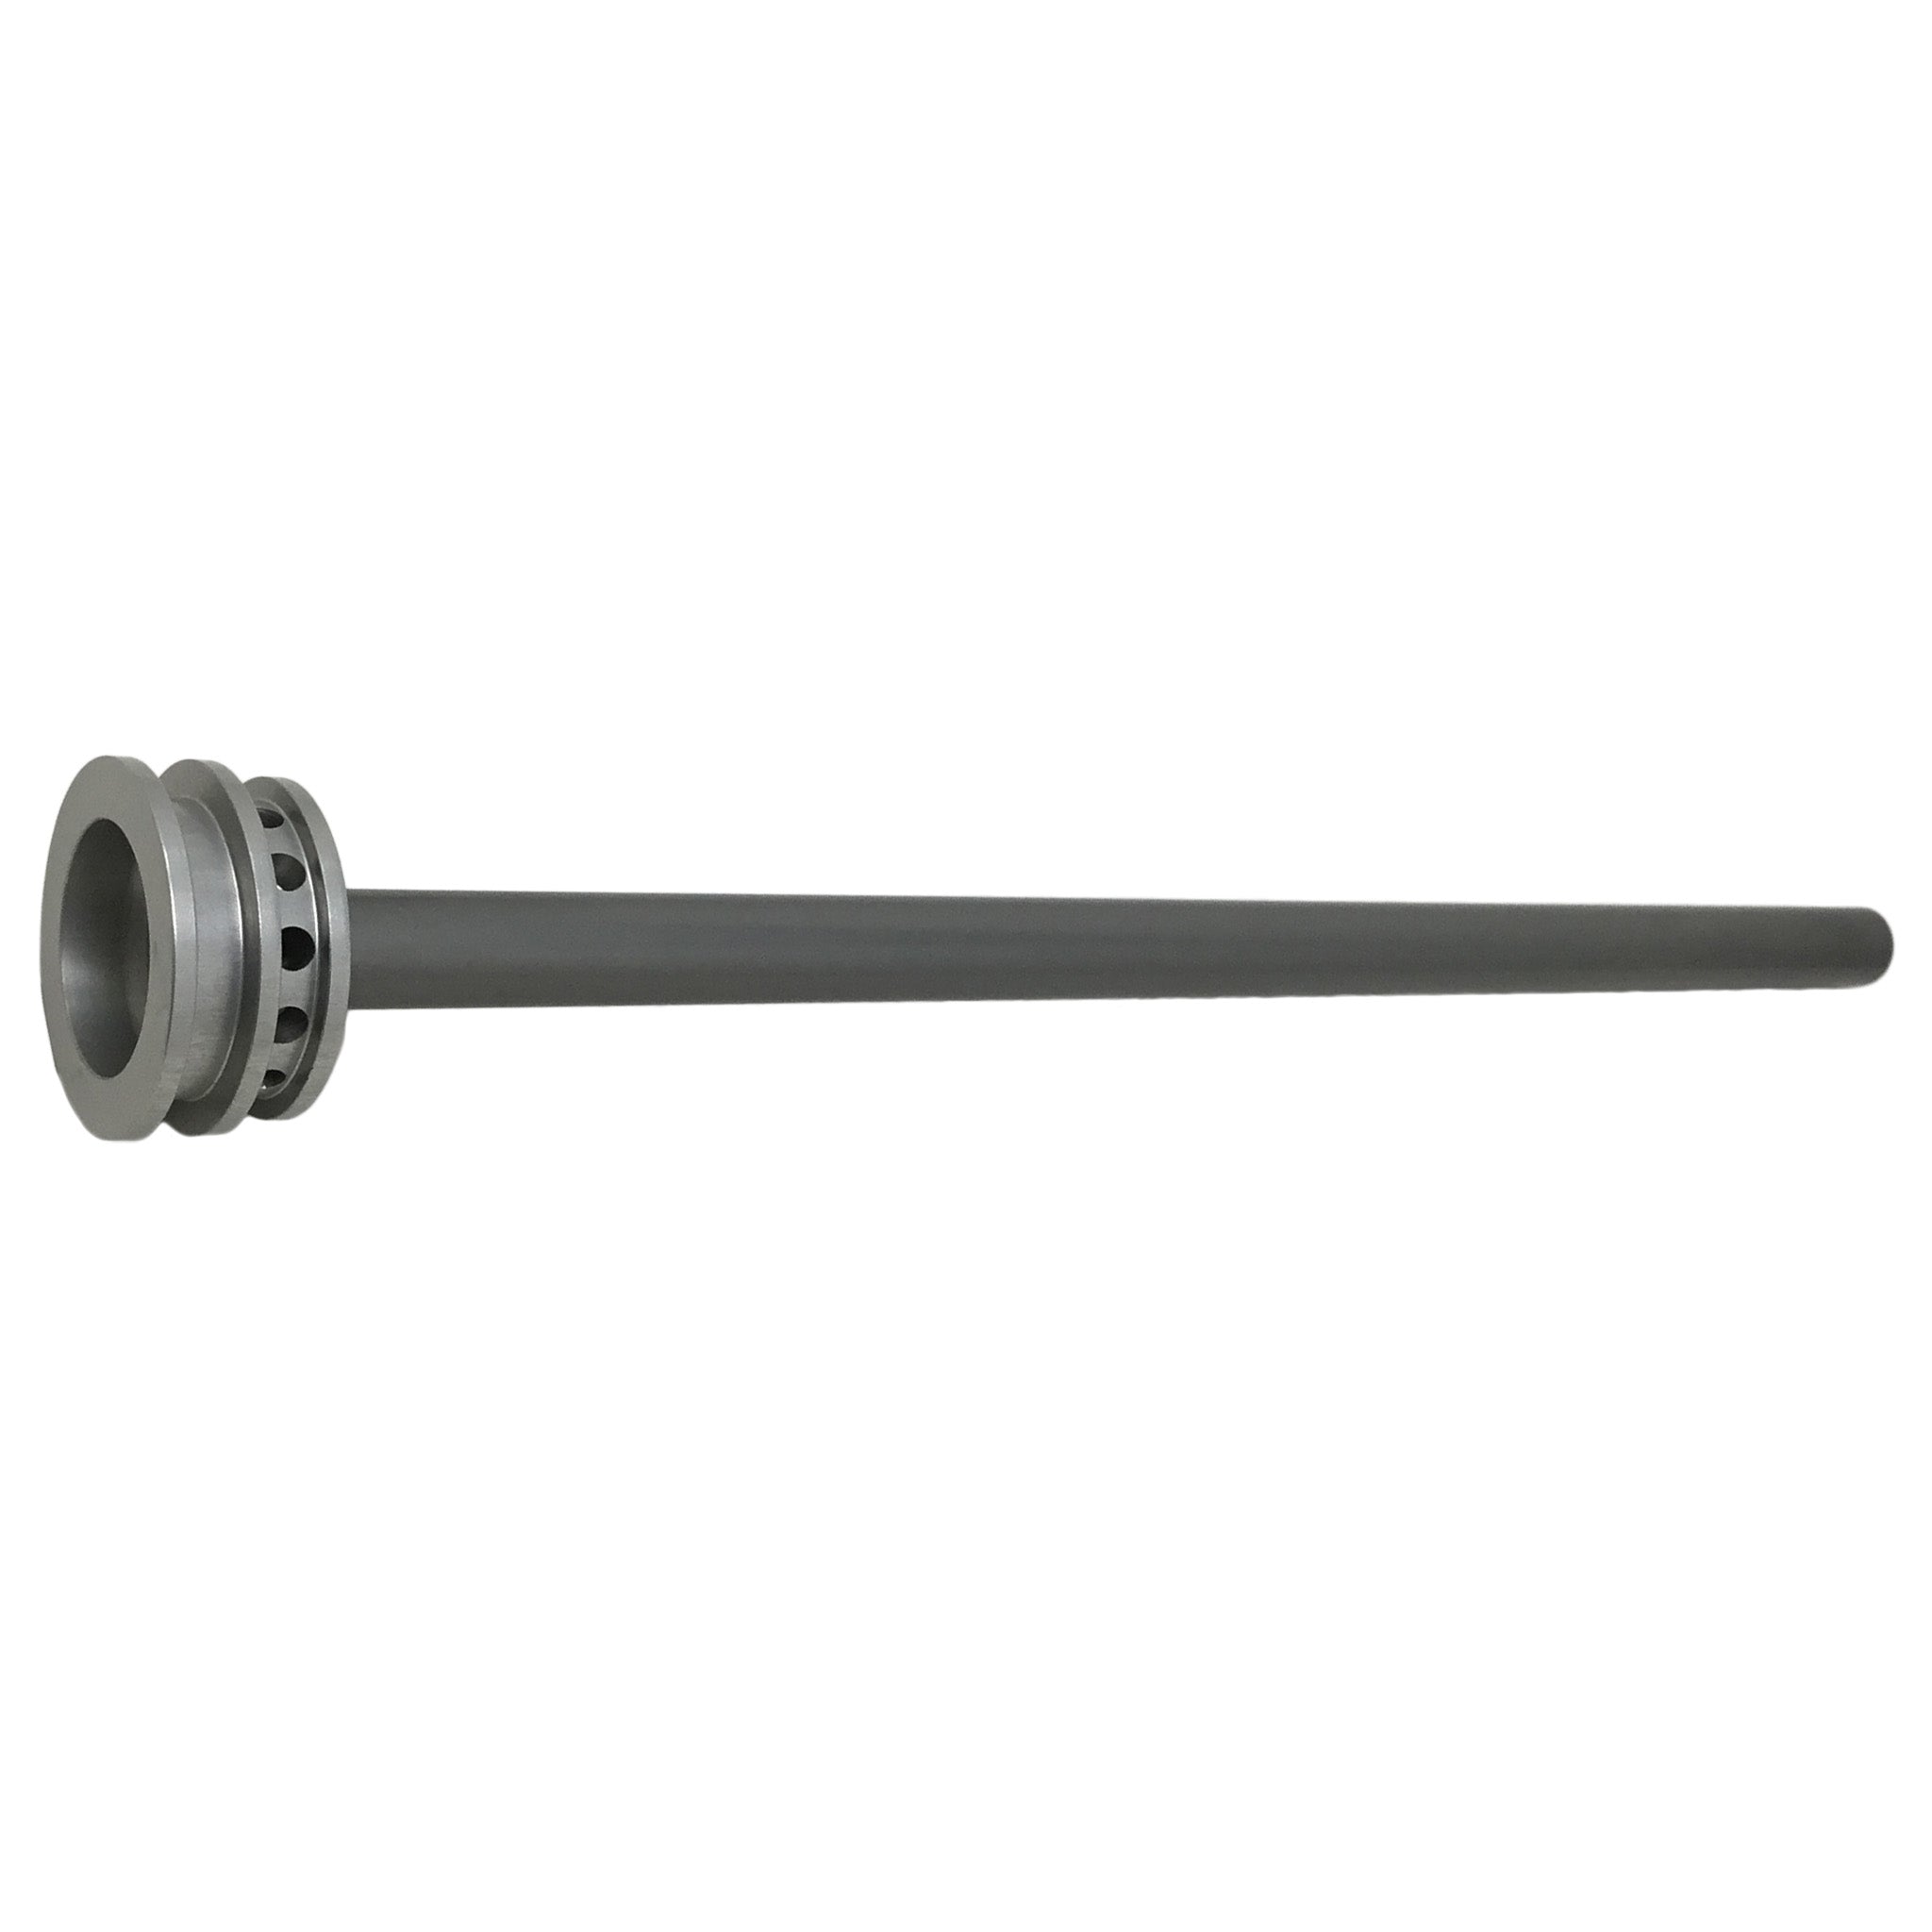 MRP Fullfil air rod assembly Stage 34mm (29")